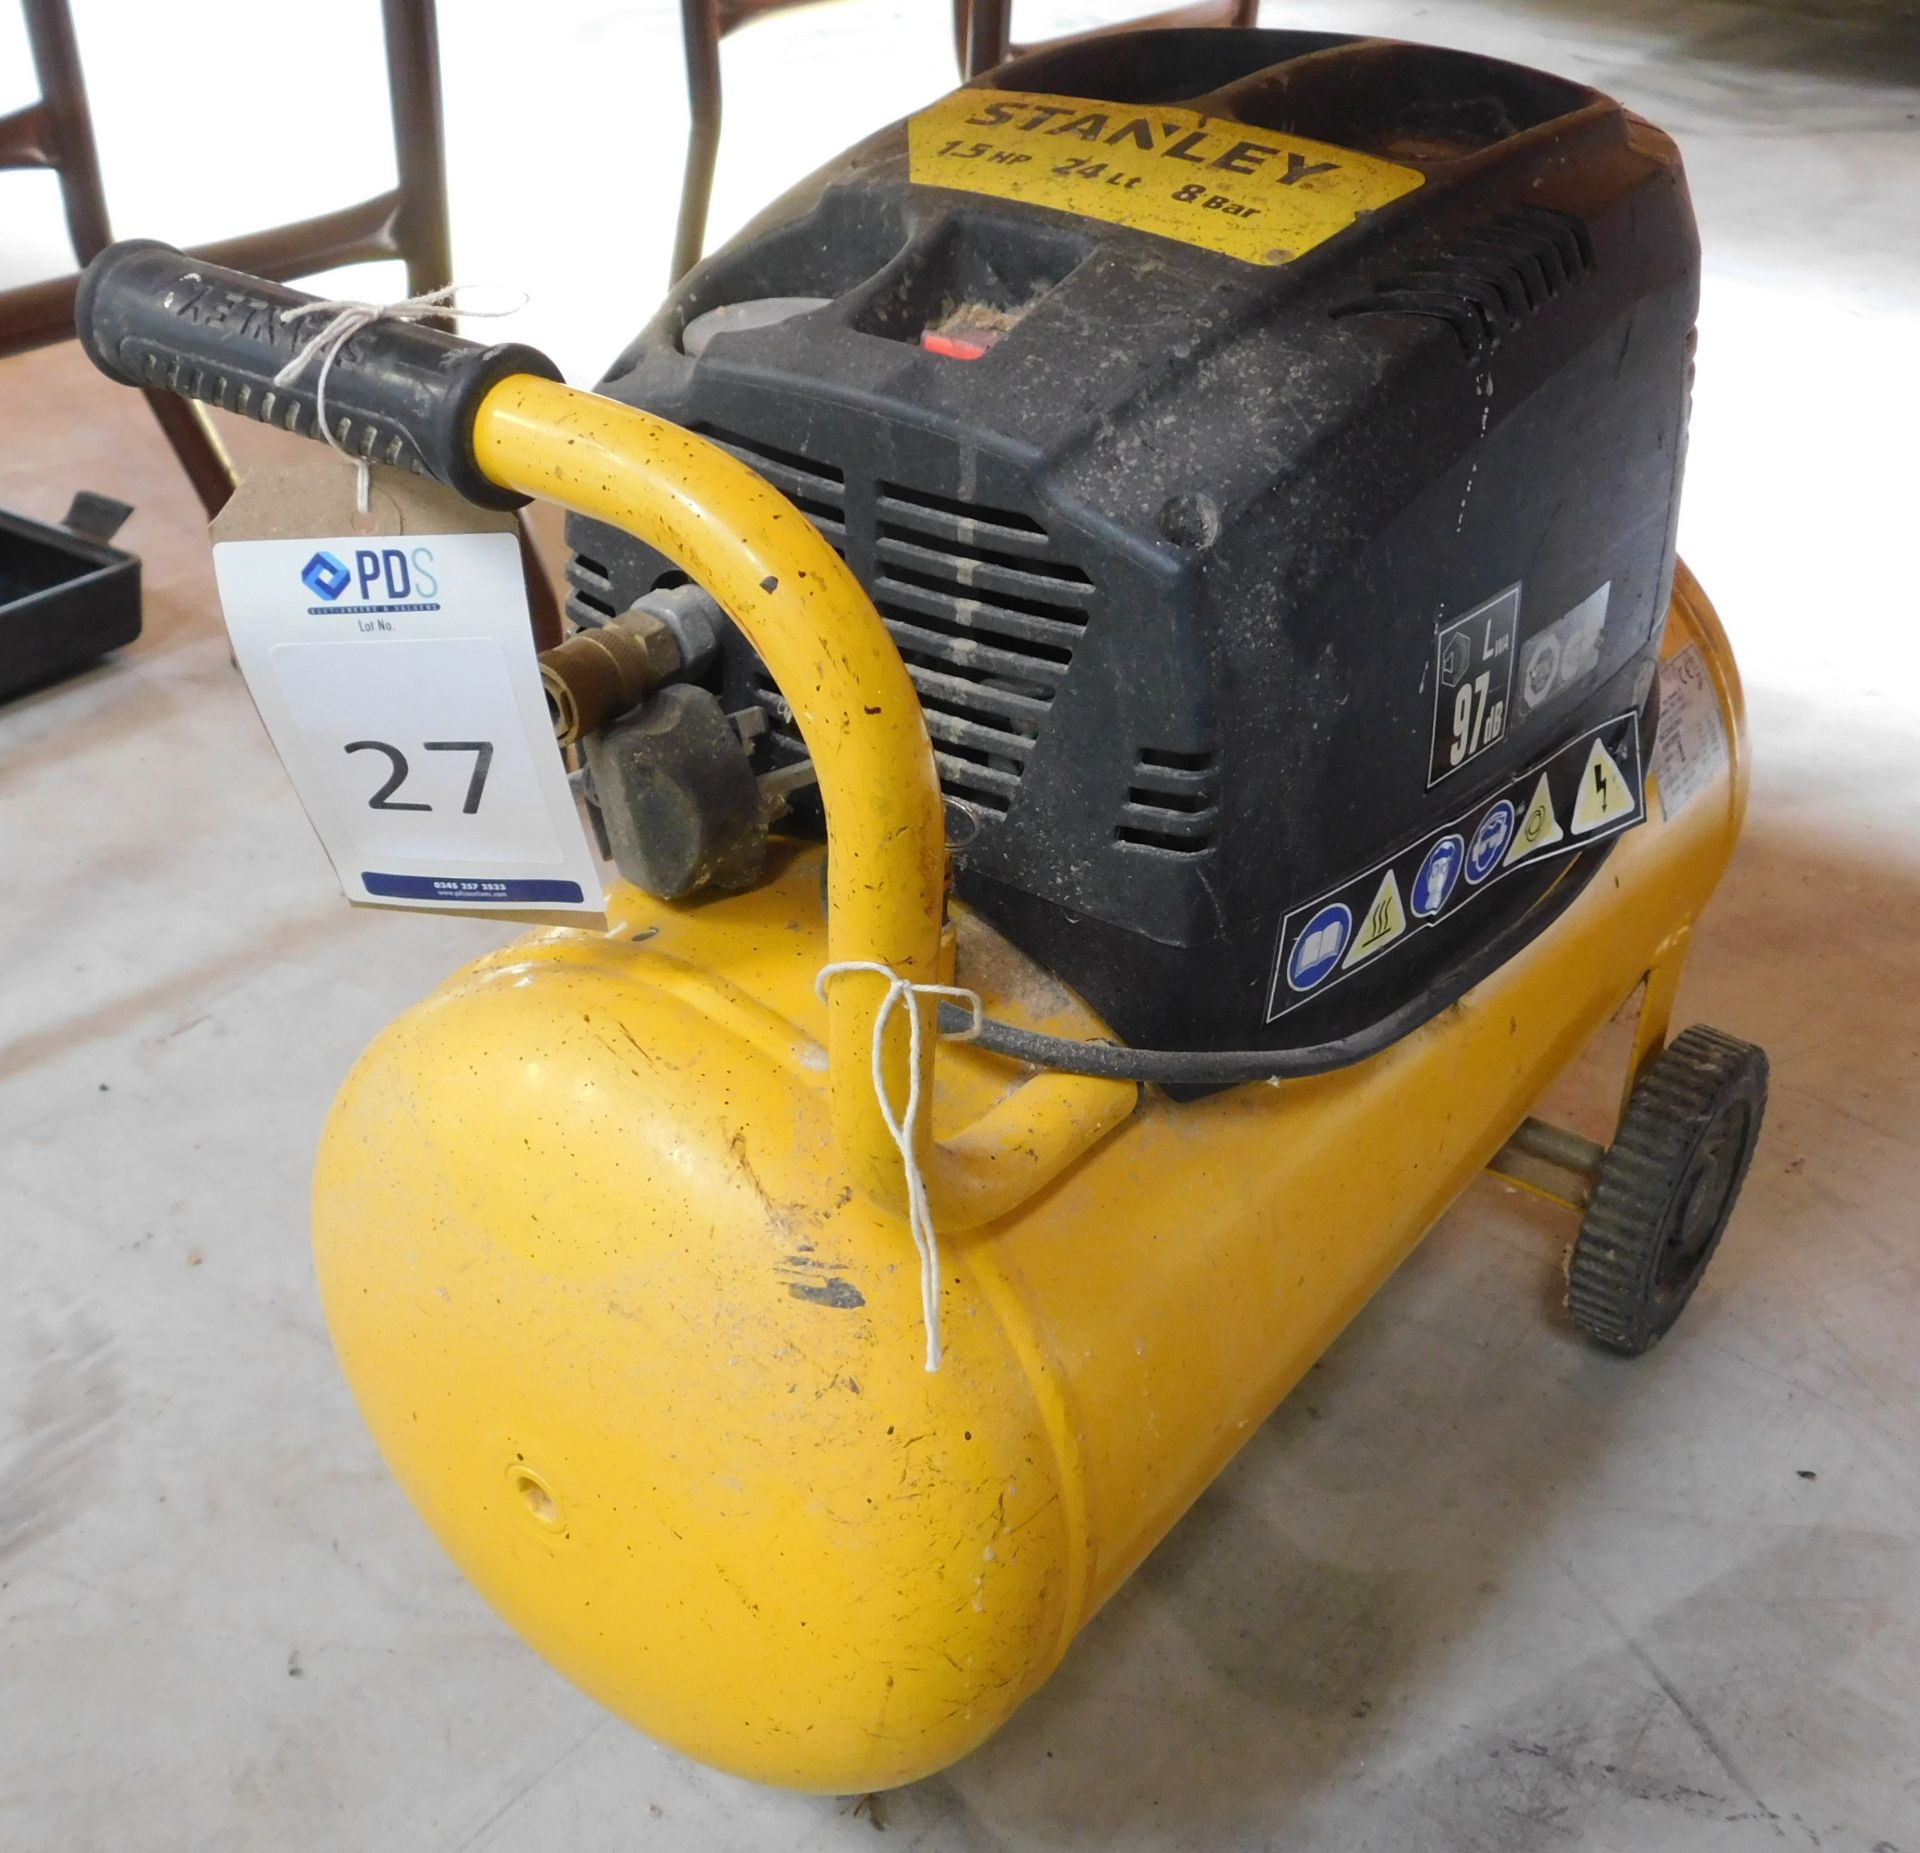 Stanley D200/8/24 Portable Compressor, Serial Number 4344330050 (Location: Brentwood. Please Refer